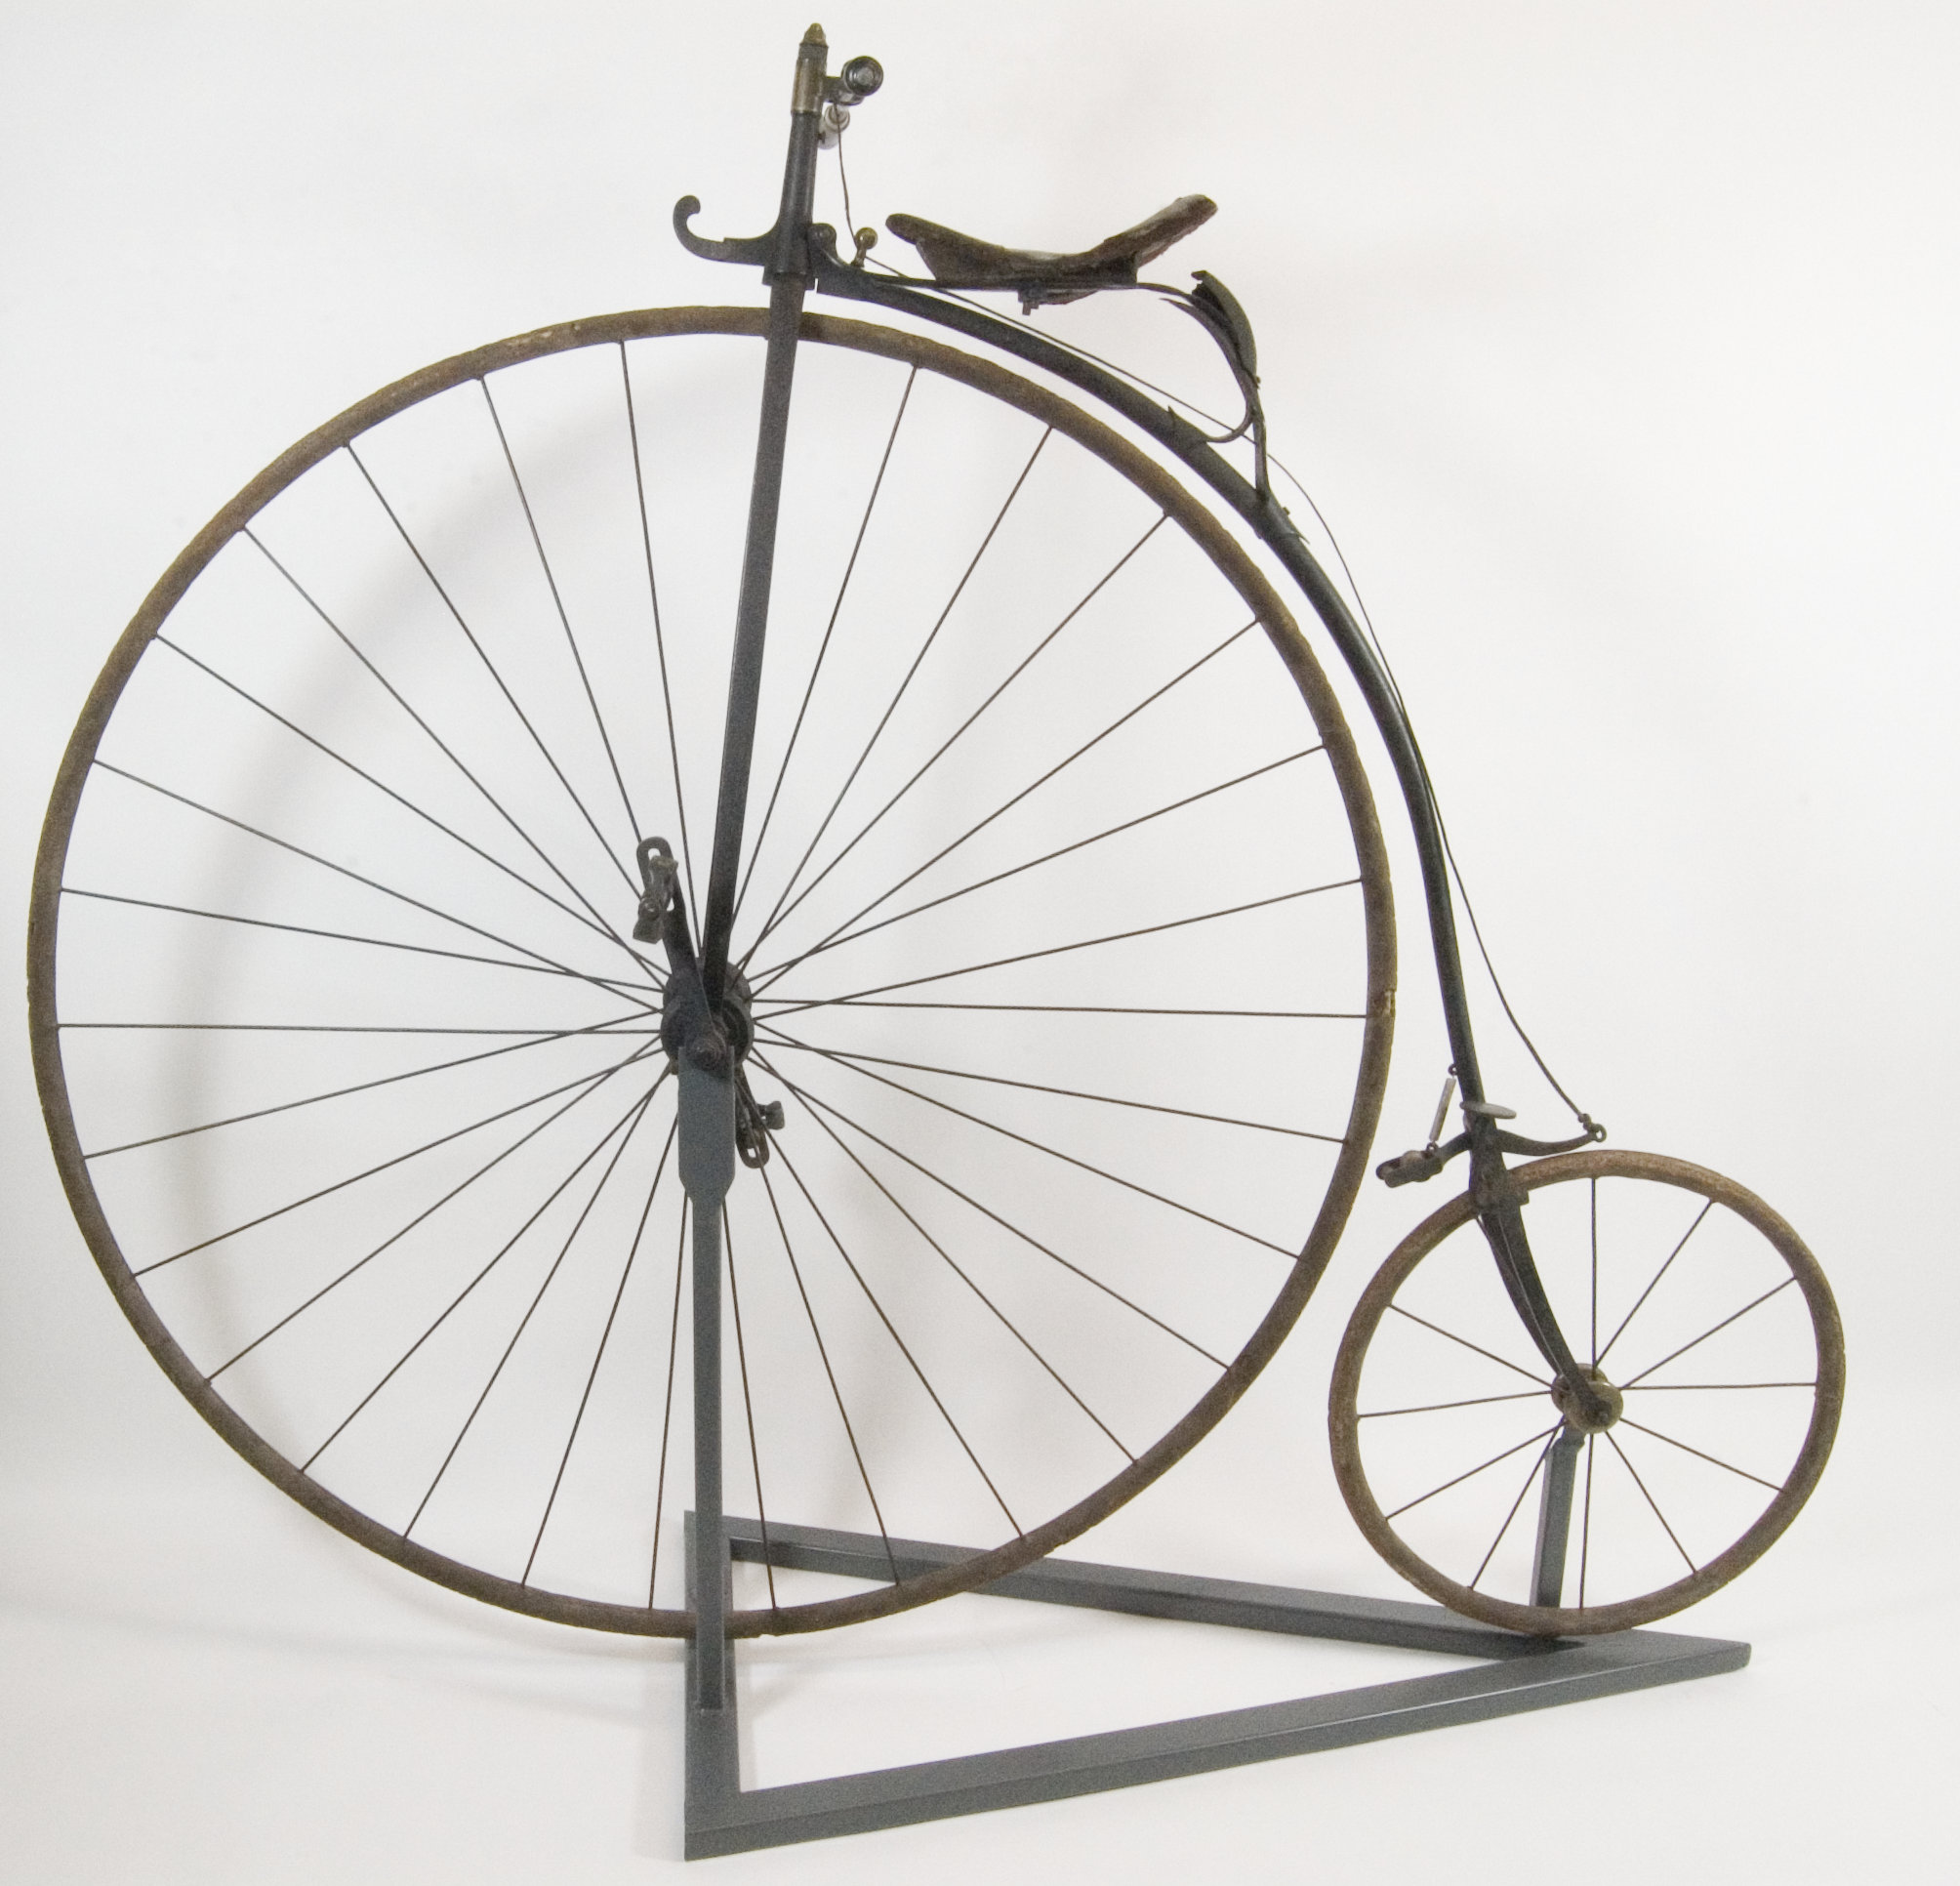 Gallery 1 Core wall - Penny Farthing Bicycle